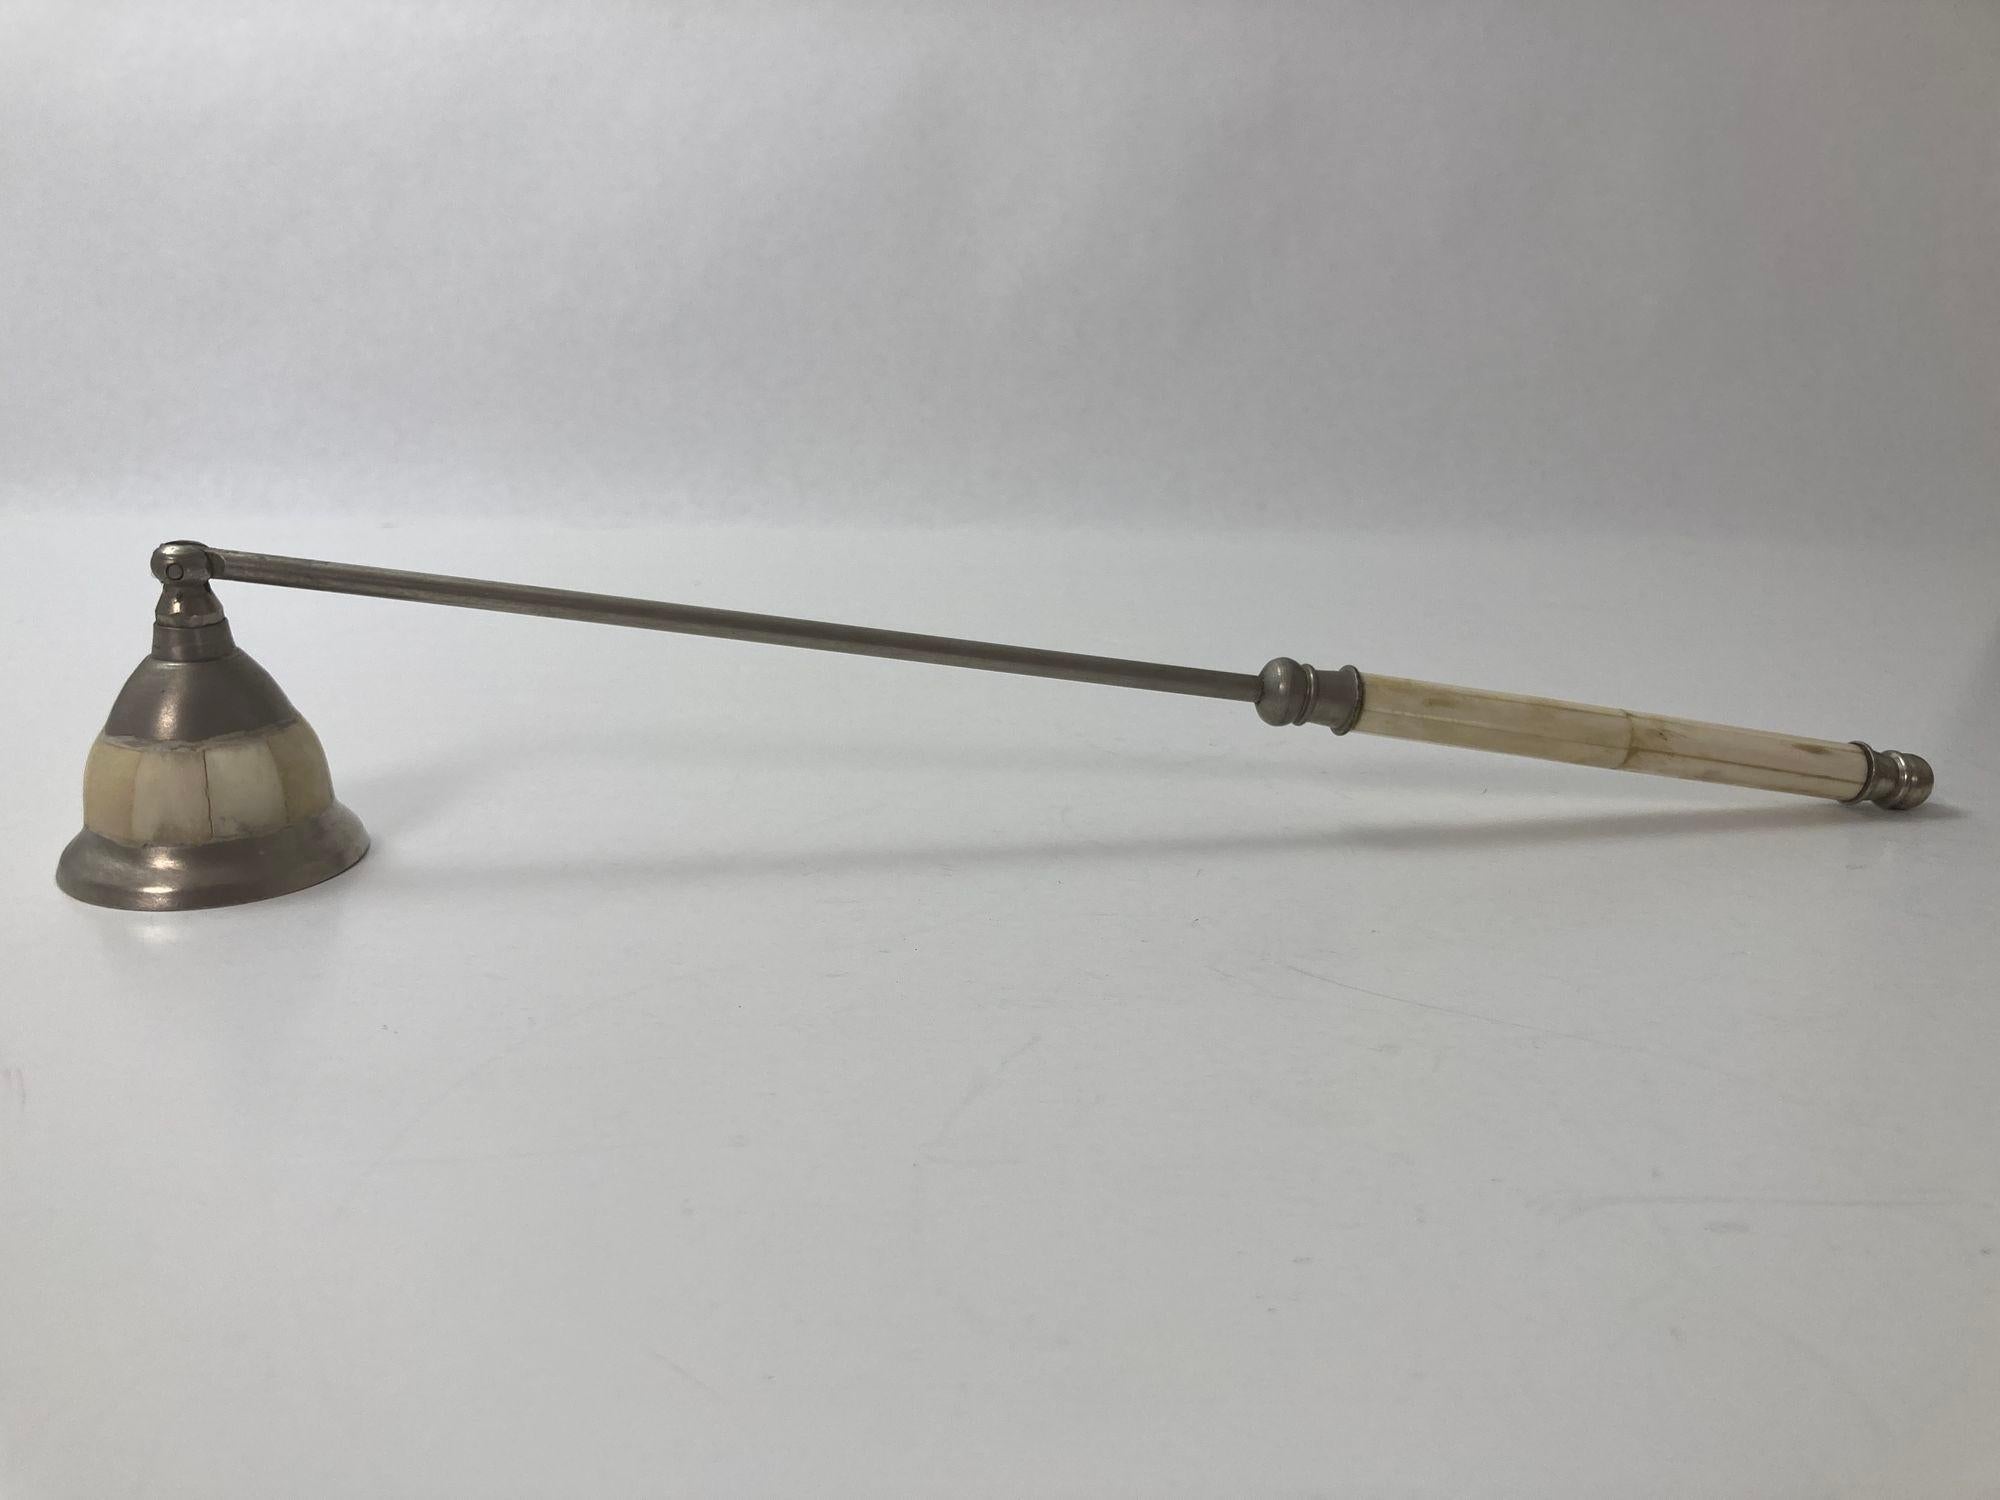 Moroccan Polished metal articulated candle snuffer with bone overlaid handle and snuffer.
Vintage Moroccan bone and metal candle snuffer.
It is in wonderful vintage condition with nice patina.
It is about 14